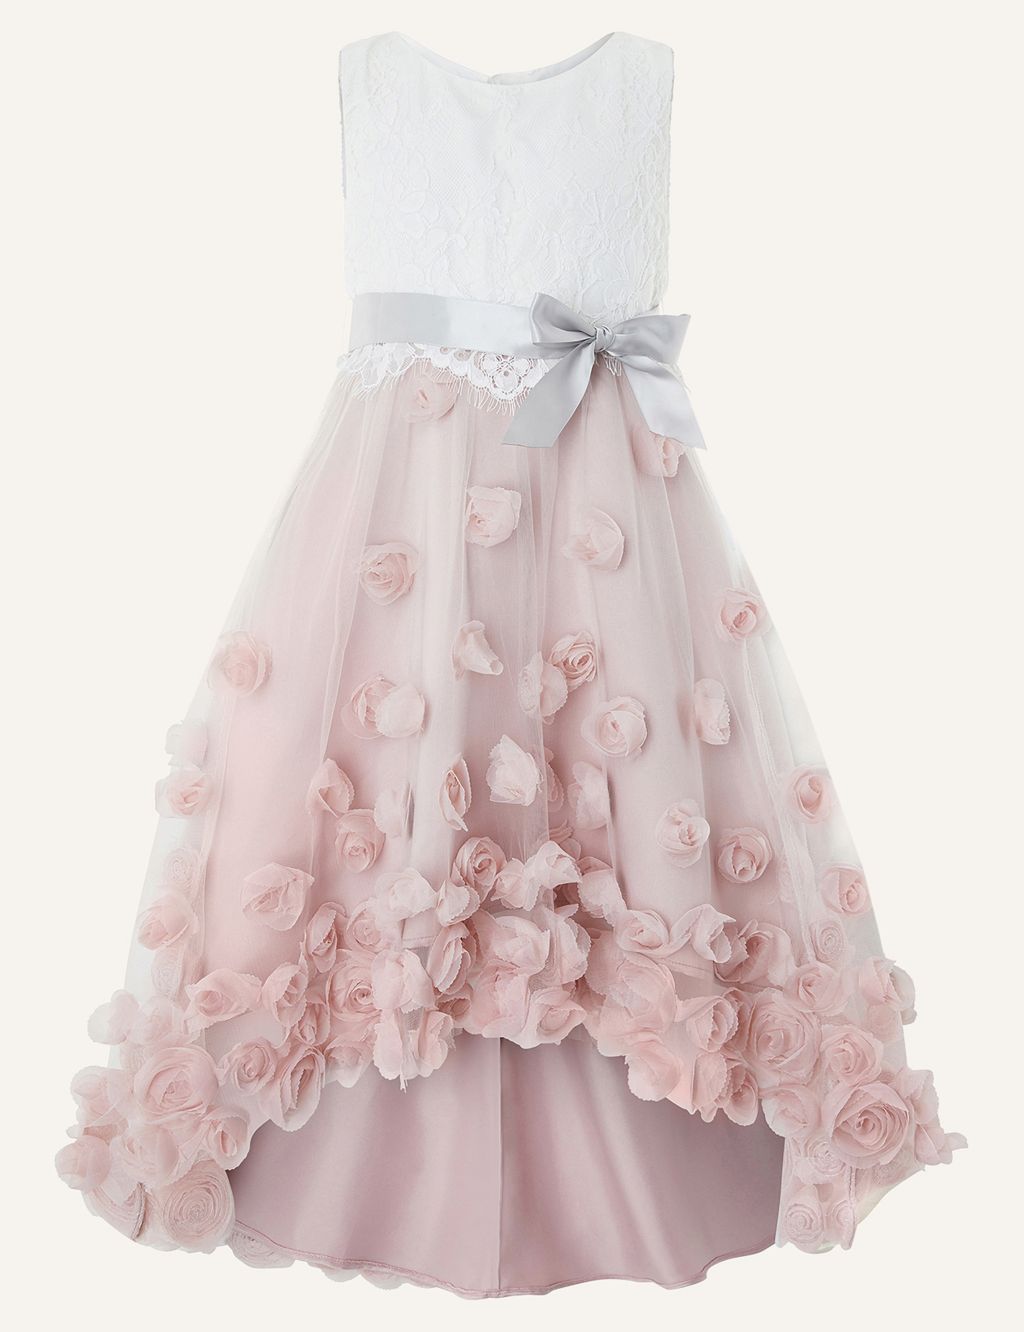 Floral Occasion Dress (3-15 Yrs) image 1